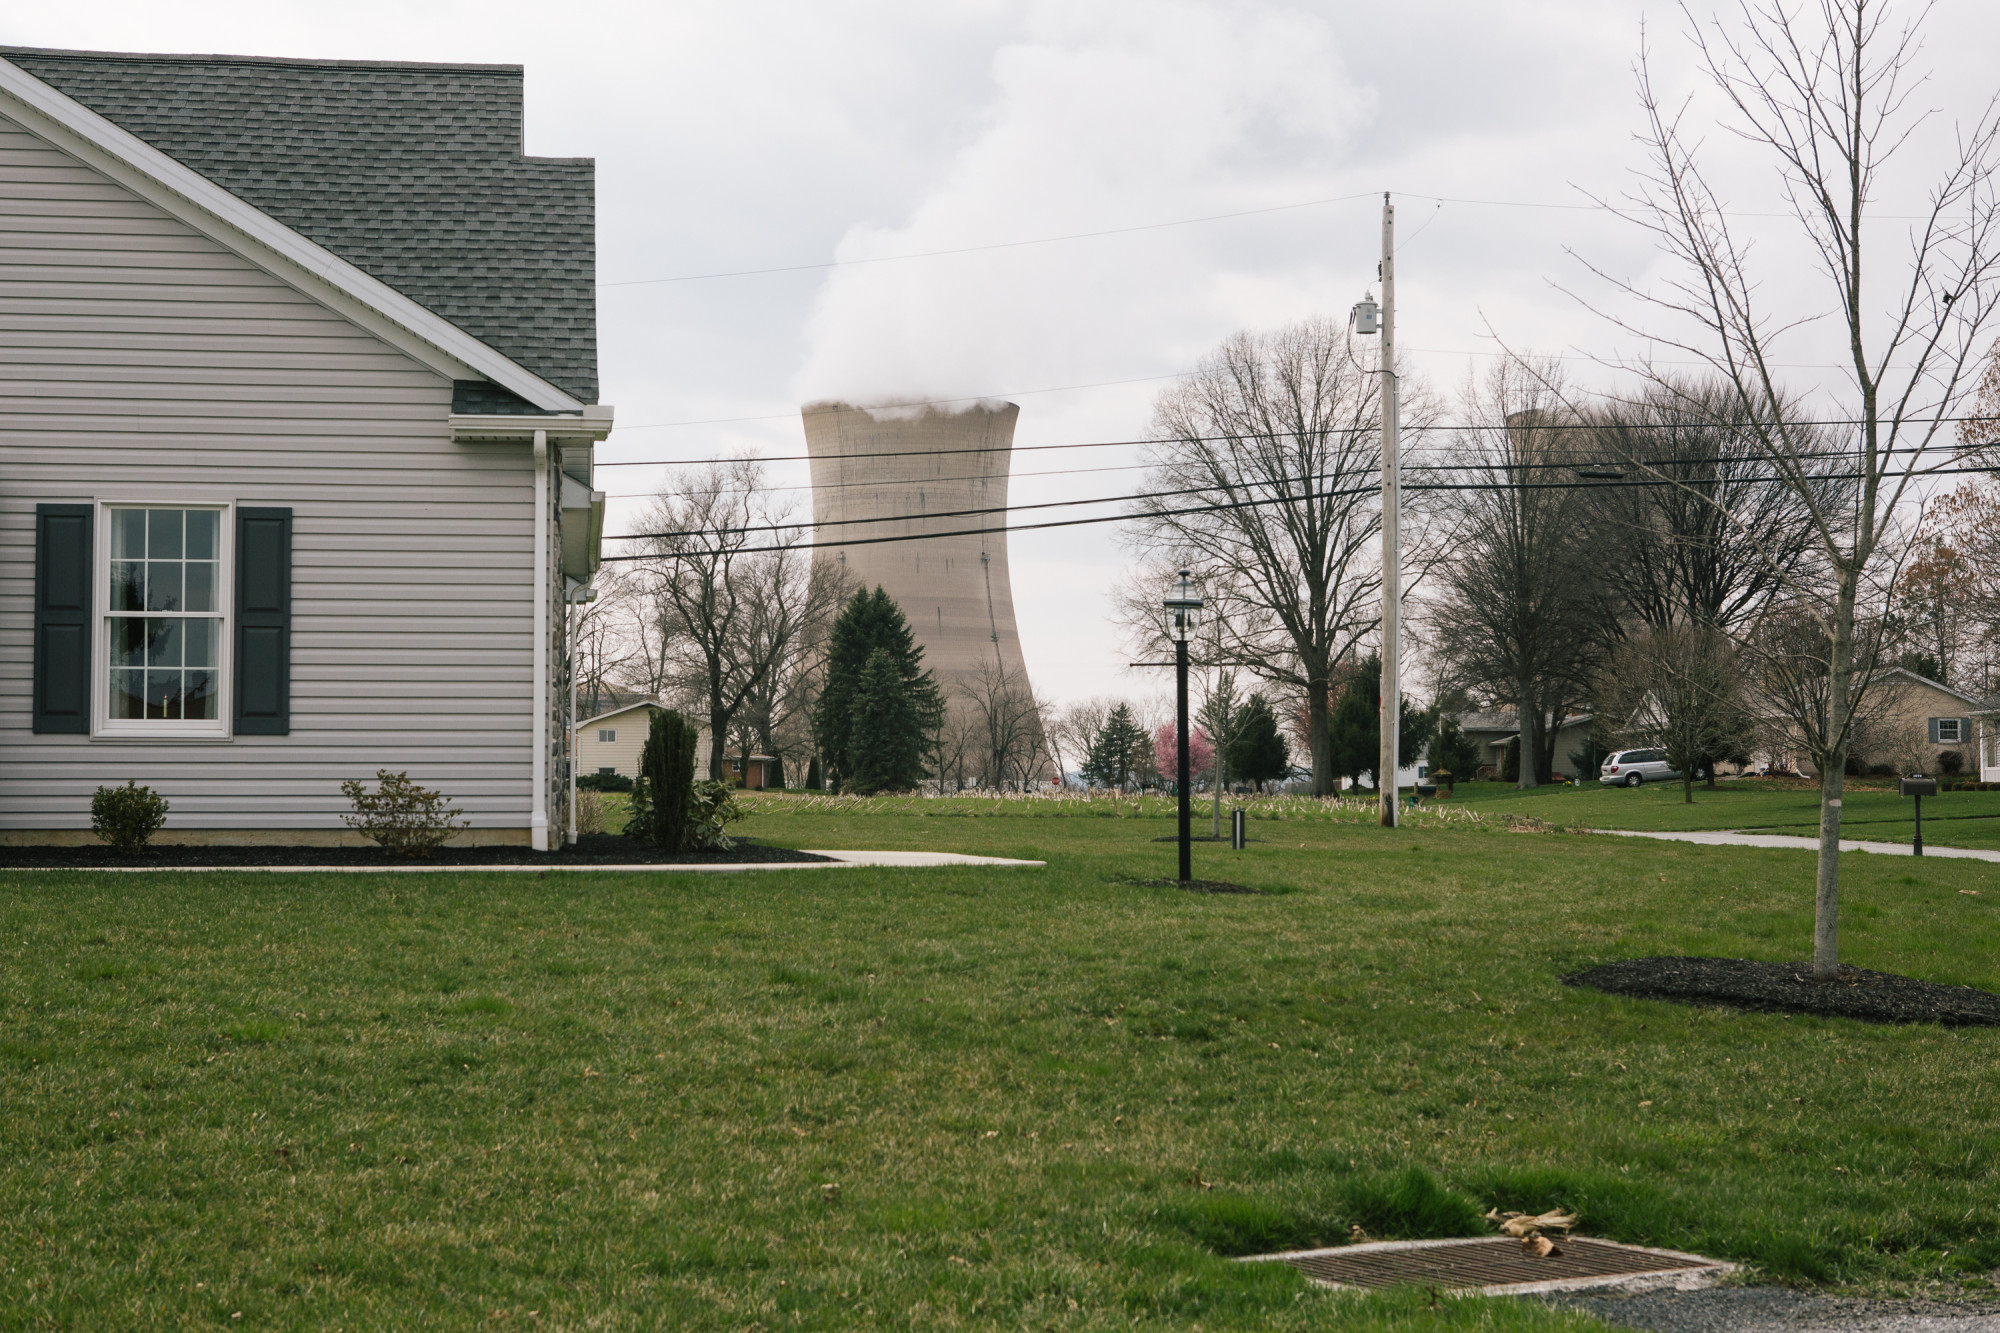 Cheap Gas Threatens To Drive The Infamous Three Mile Island Nuclear Plant Out Of Business